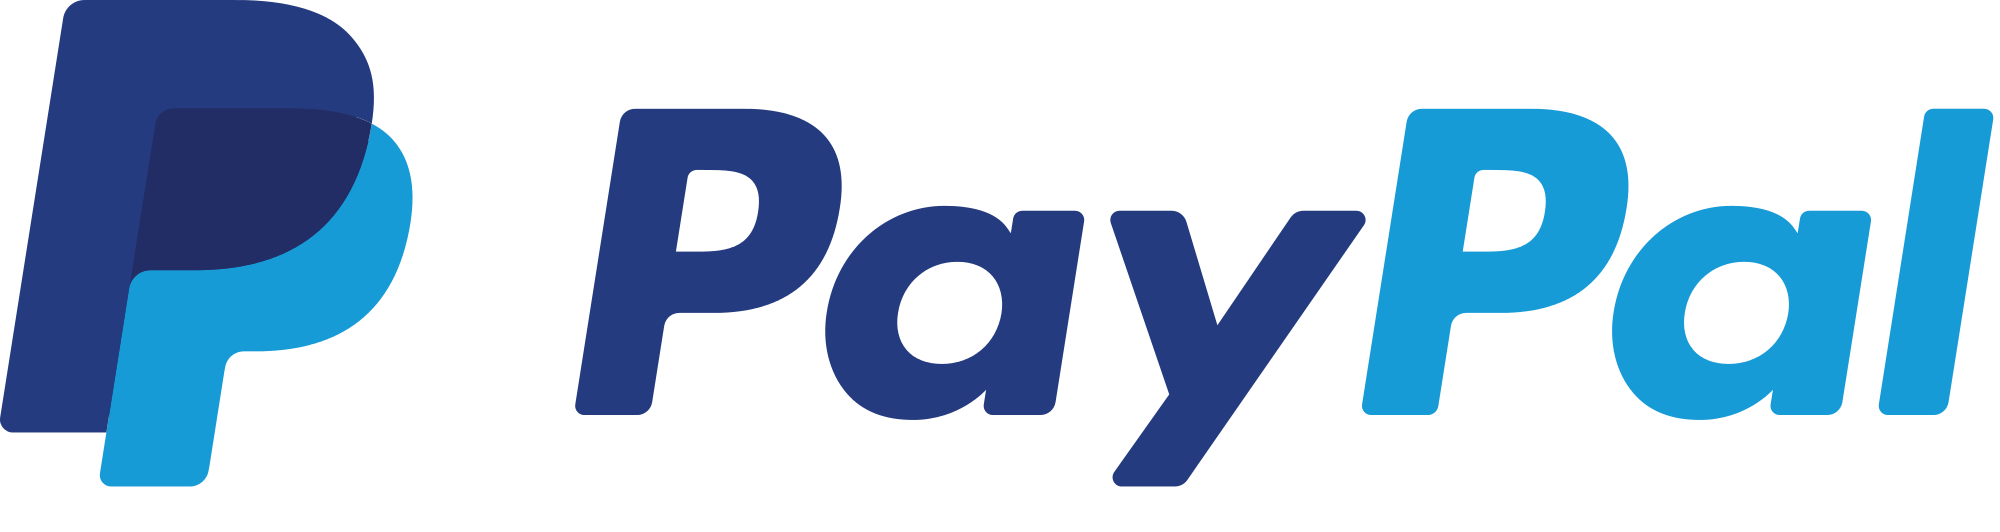 PayPal Logo - File:PayPal.svg - Wikimedia Commons